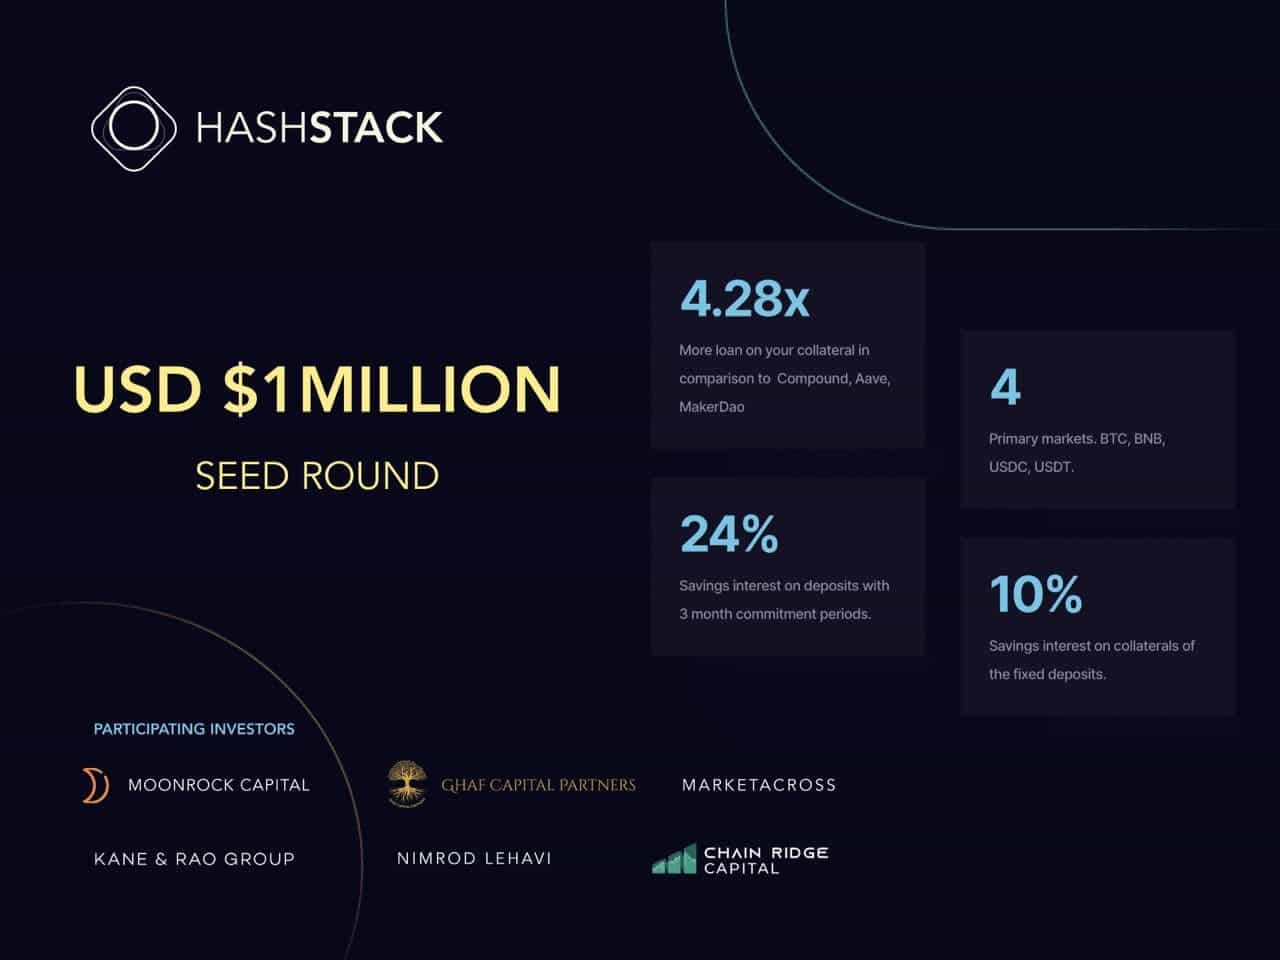 Hashstack-secures-$1m-seed-funding-to-bring-under-collateralized-loans-to-defi